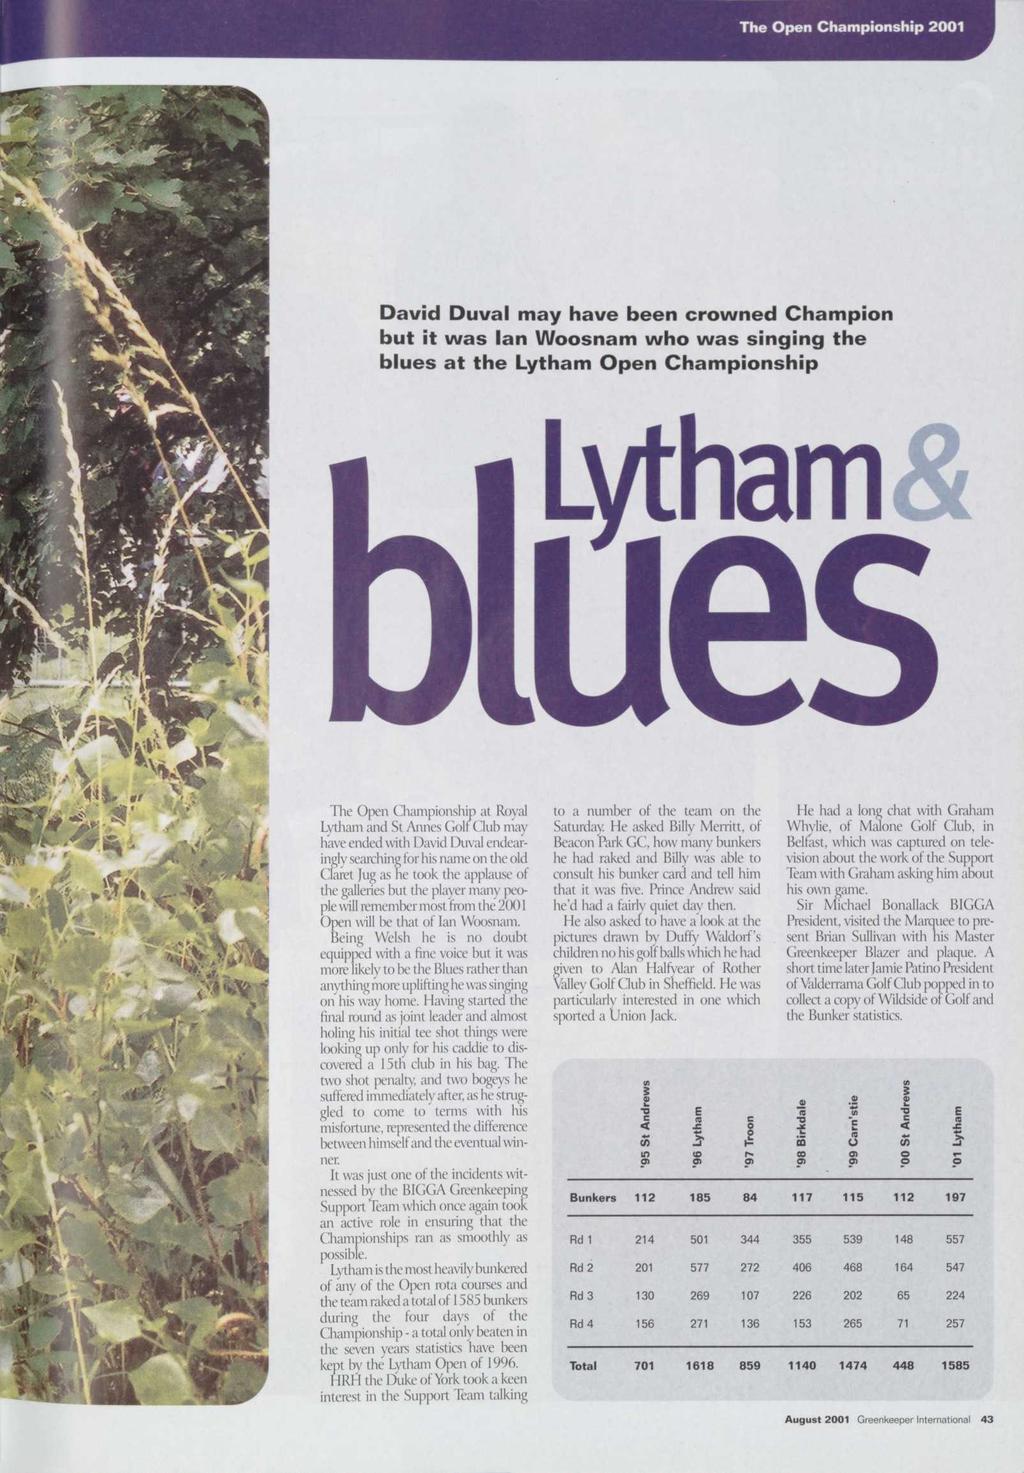 David Duval may have been crowned Champion but it was Ian Woosnam who was singing the blues at the Lytham Open Championship l ilvtibjjt - V i?